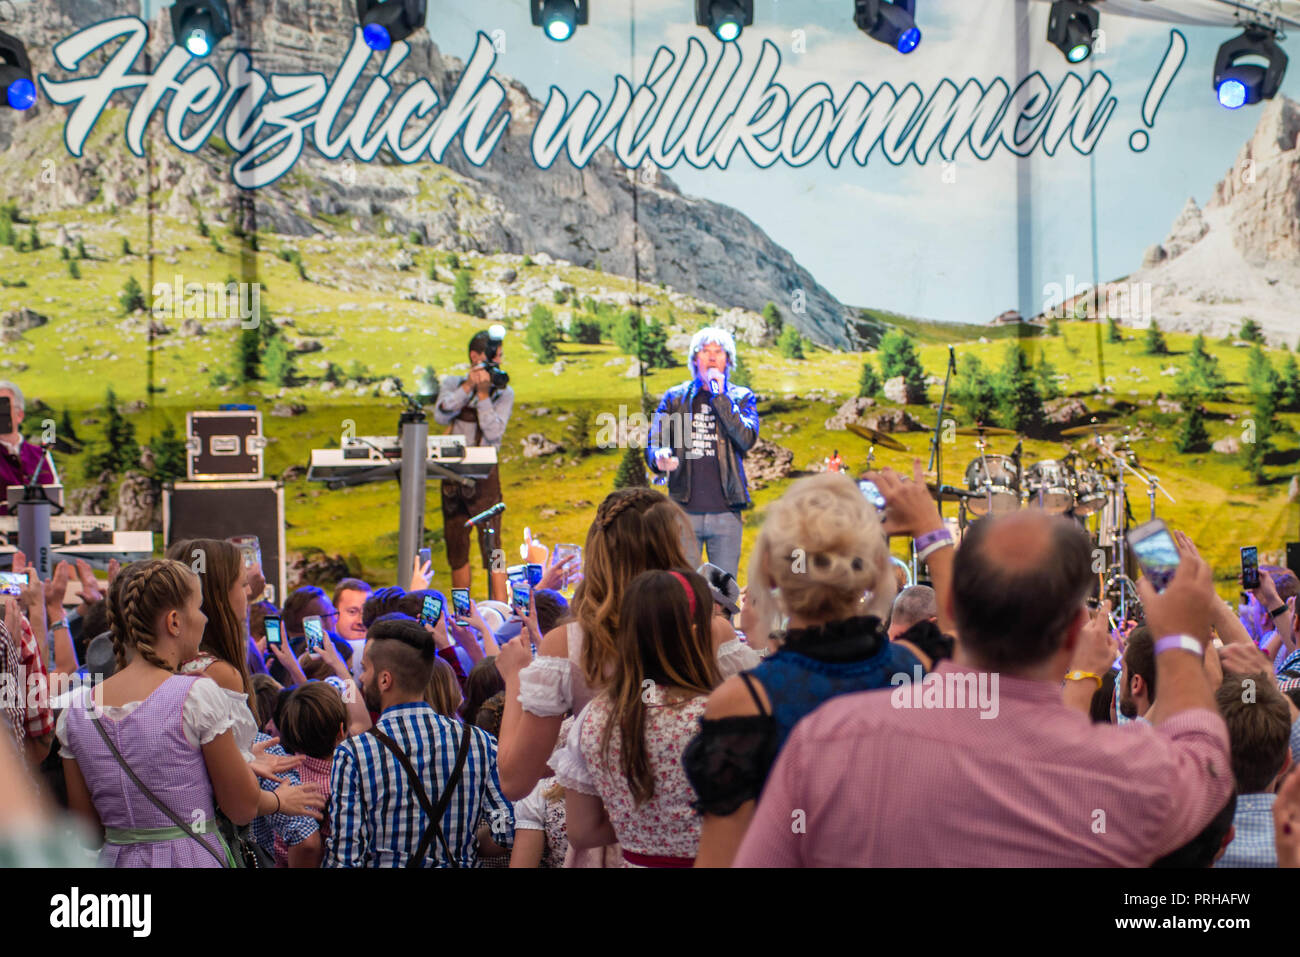 Koblenz, Germany 26.09.2018 large crowd cheers on German band singer mickie krause during largest annual Oktoberfest party featuring traditional beer, Stock Photo